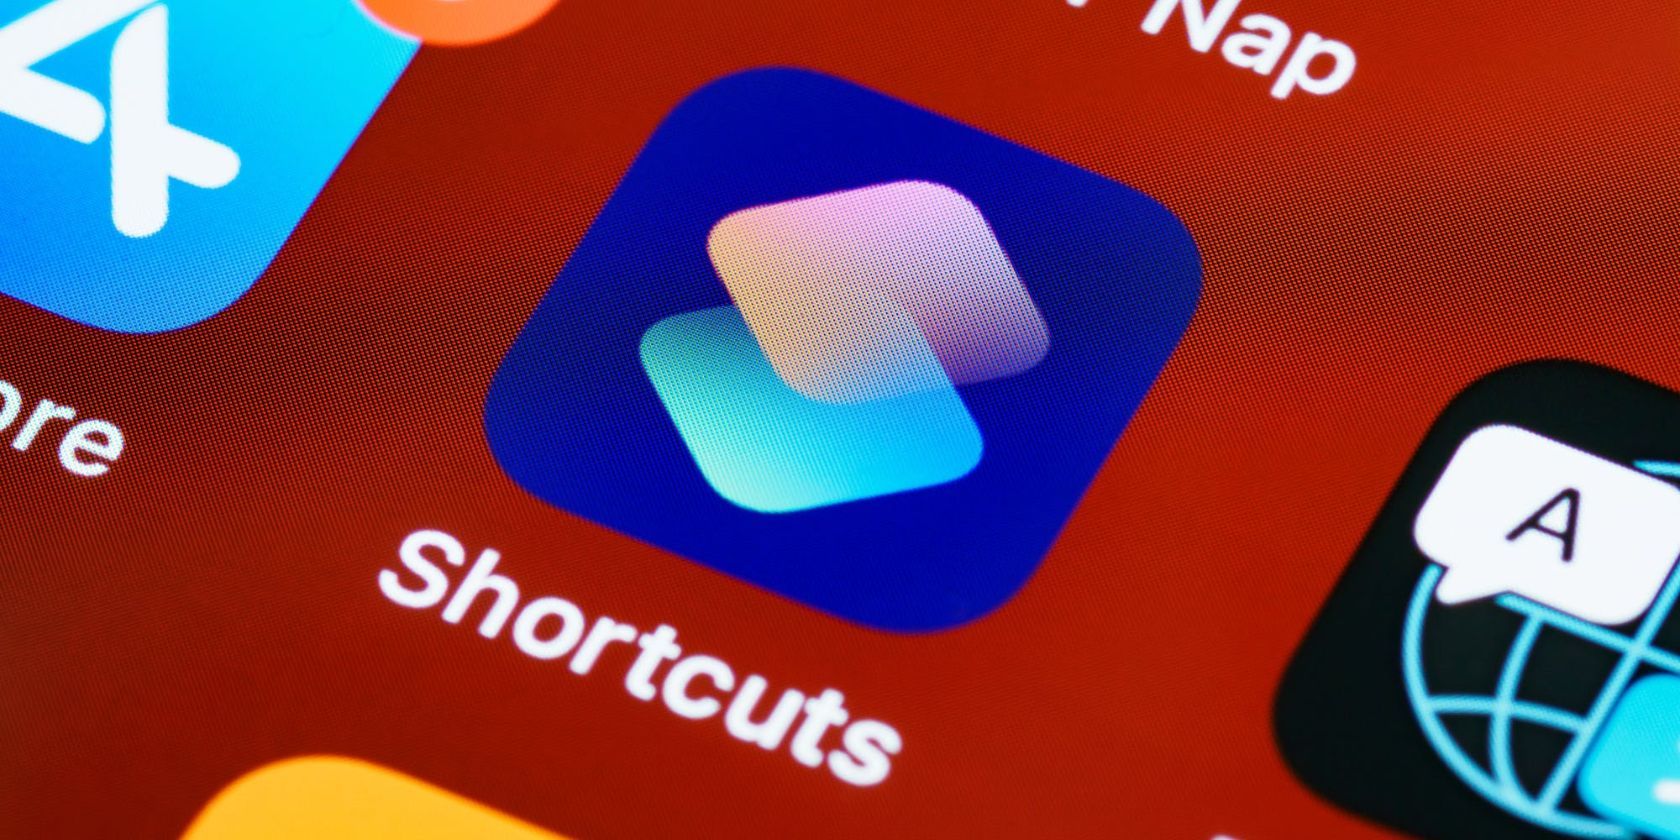 6 Quick Ways to Run Shortcuts on Your iPhone